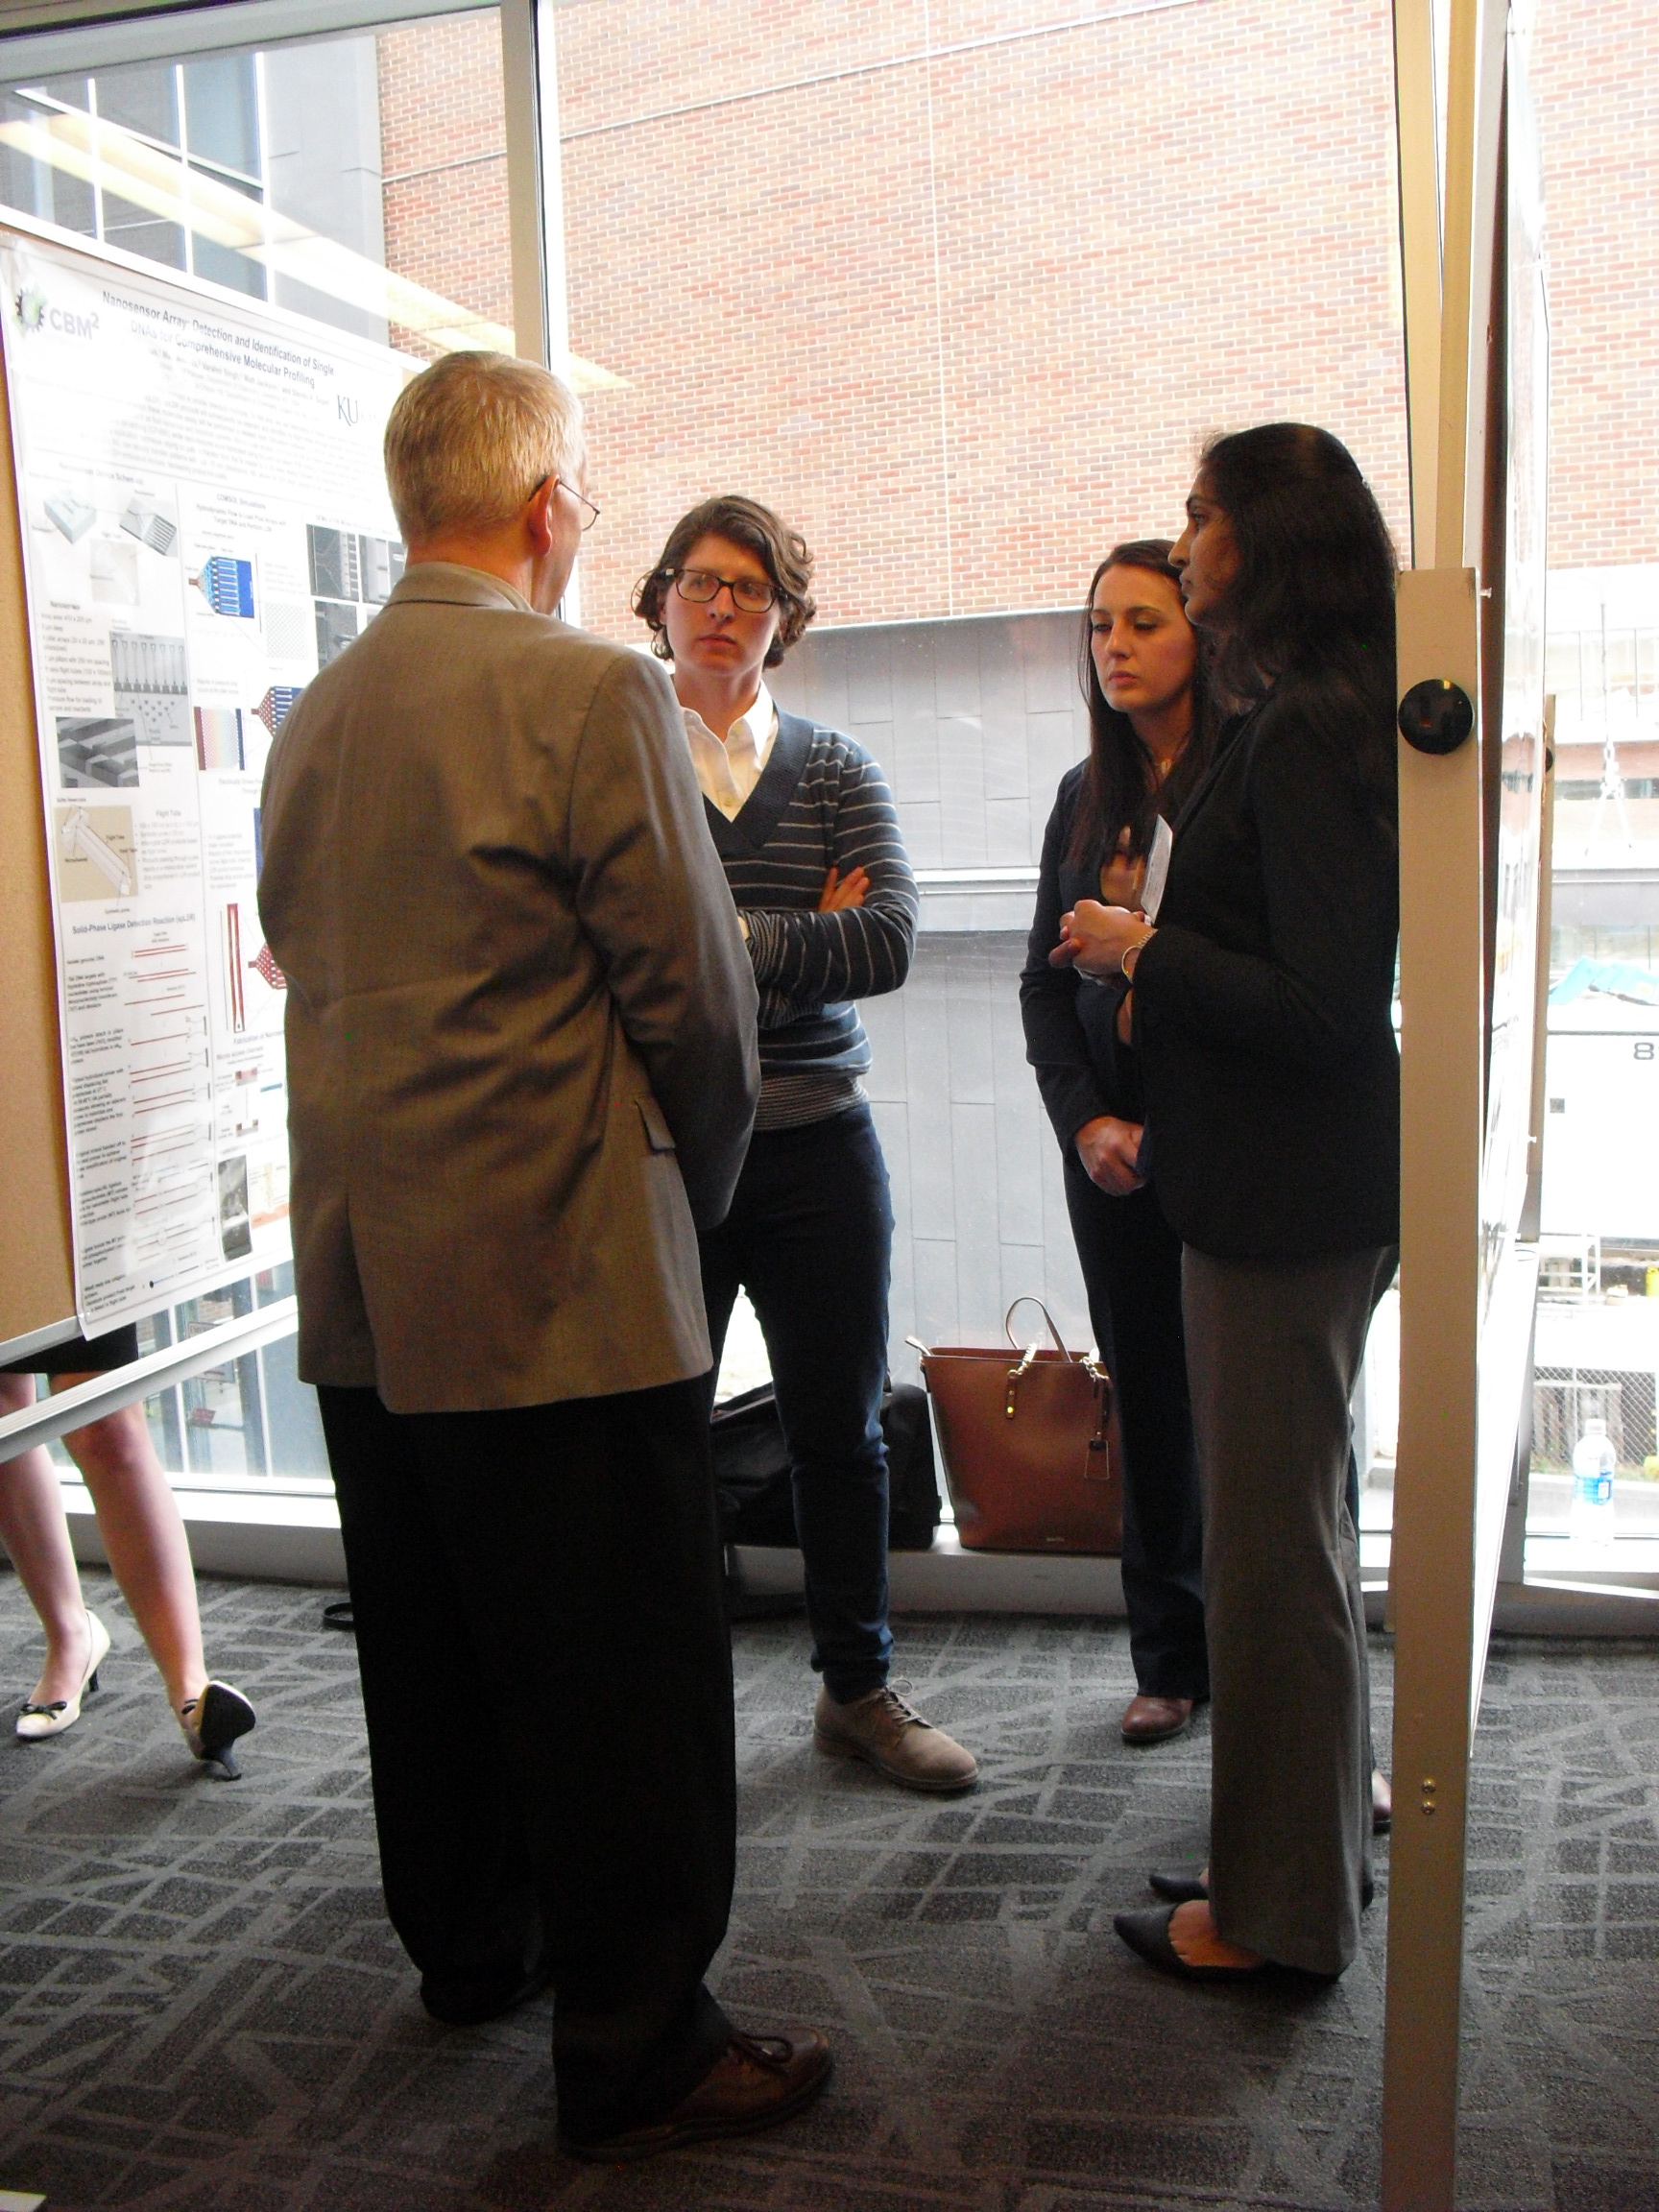 Four individuals engaged in a discussion while standing between two research posters.